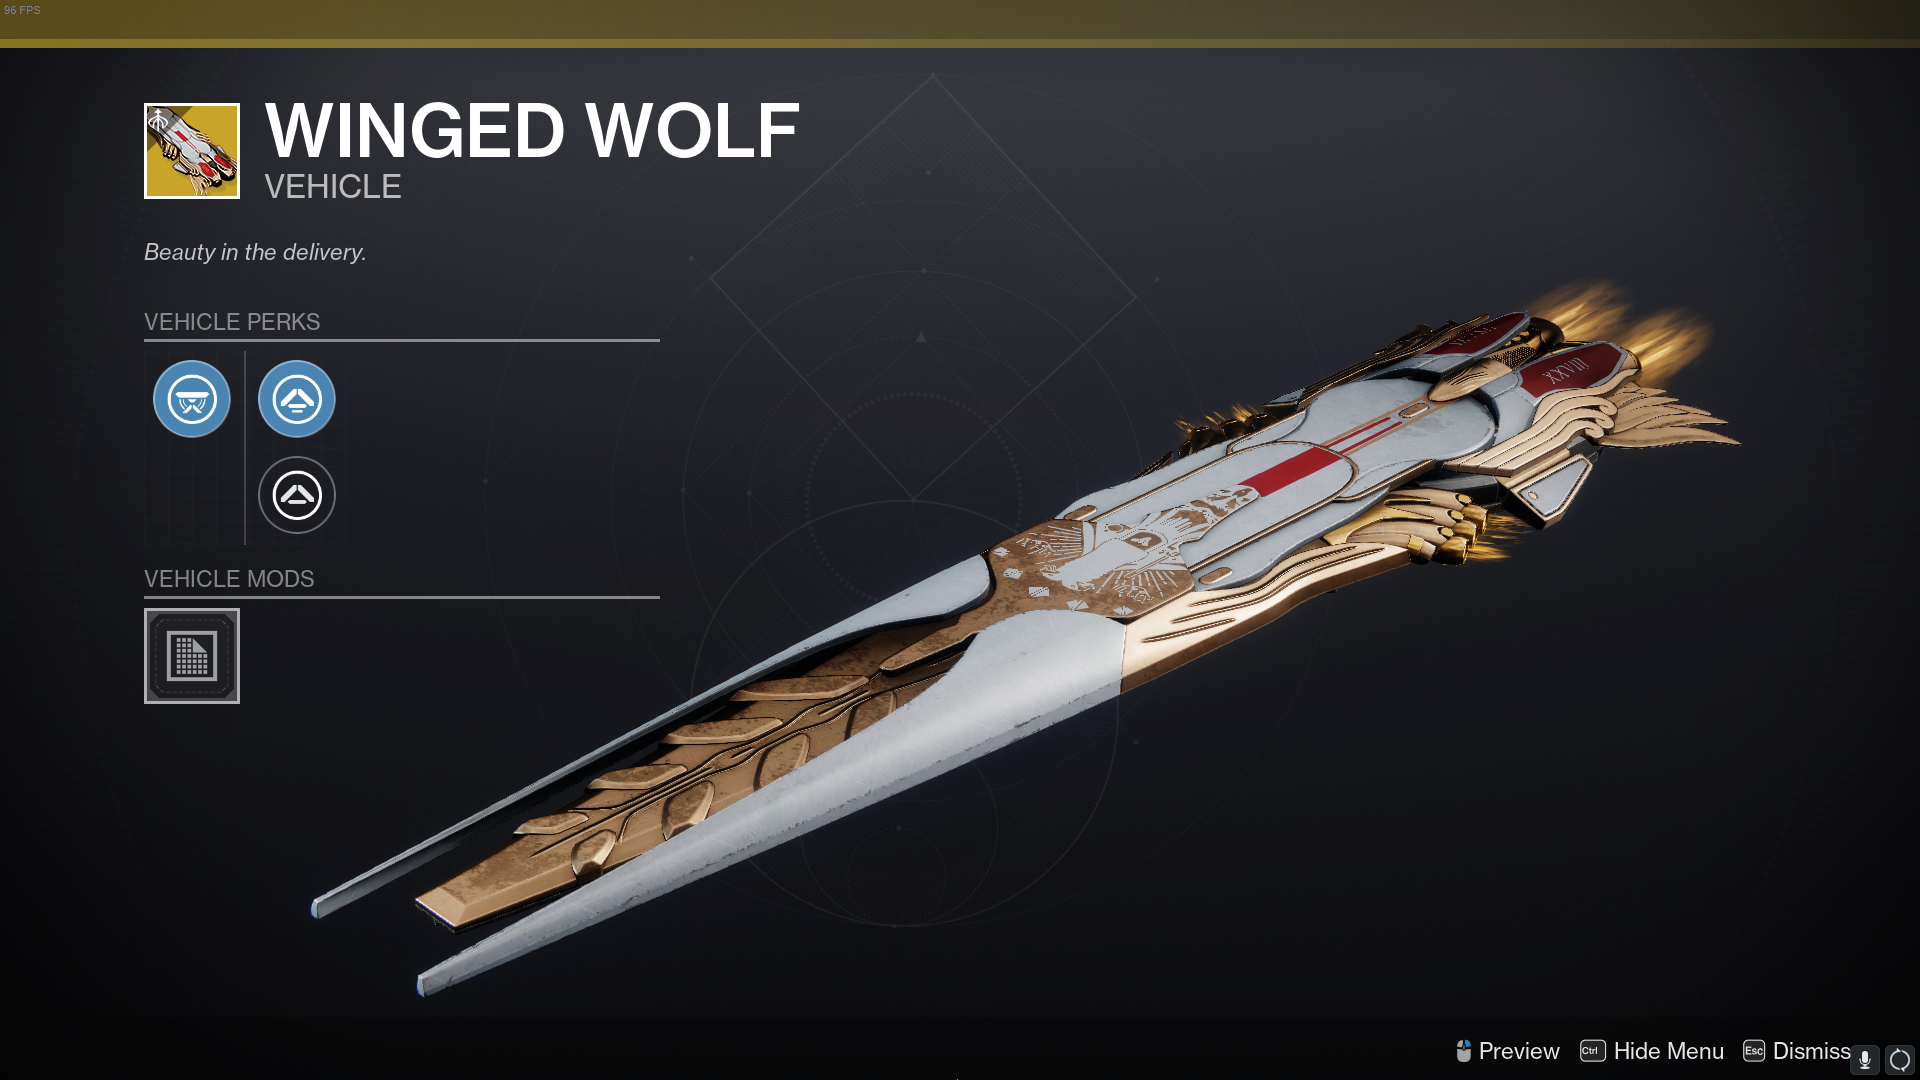 The Winged Wolf skimmer, a hoverboard inspired by the Gjallarhorn rocket launcher.